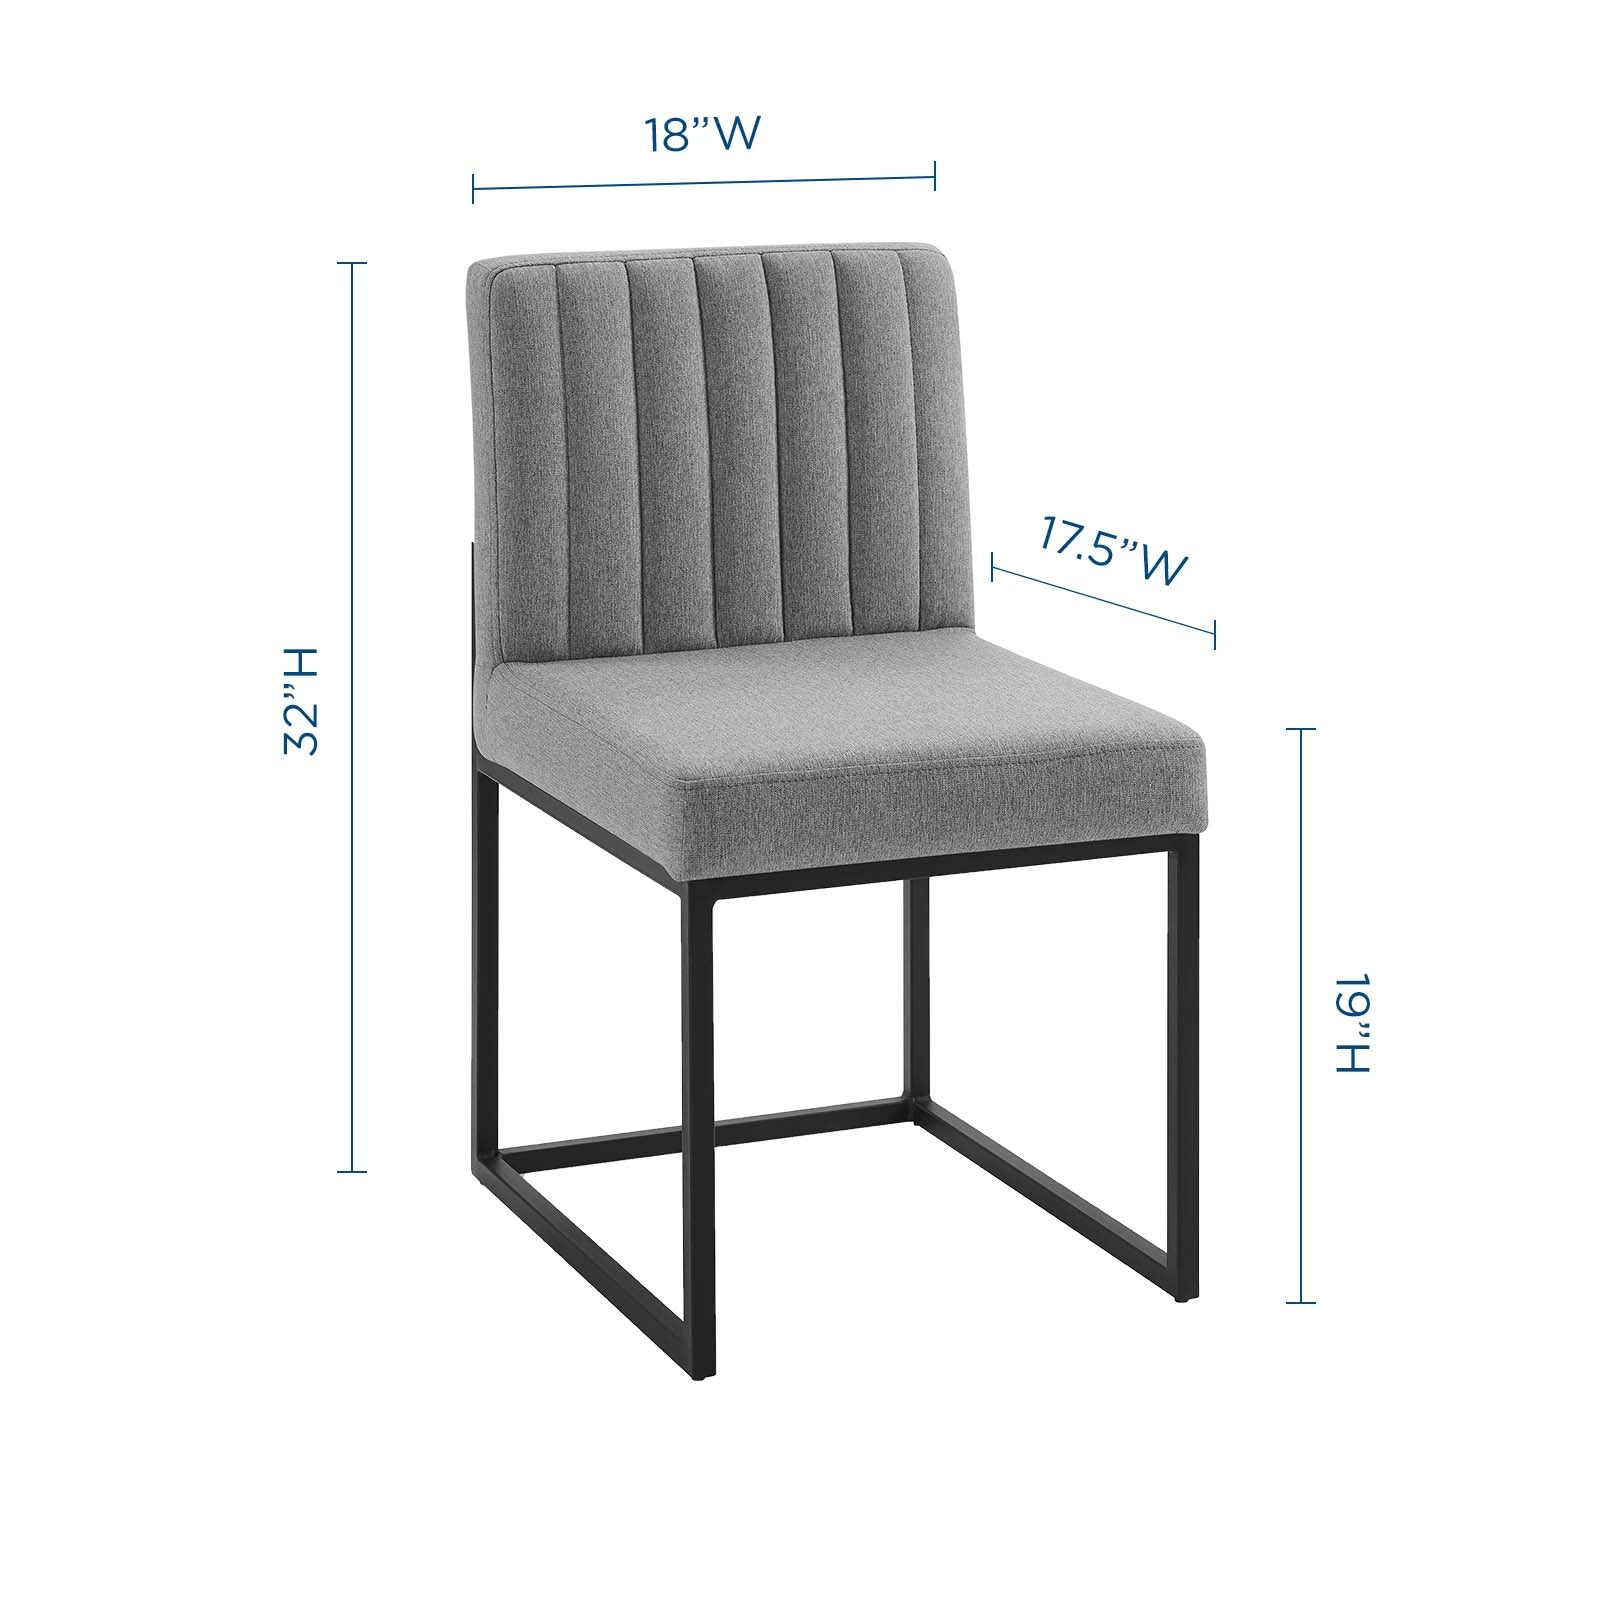 Modway Dining Chairs - Carriage Channel Tufted Sled Base Upholstered Fabric Dining Chair Black Light Gray